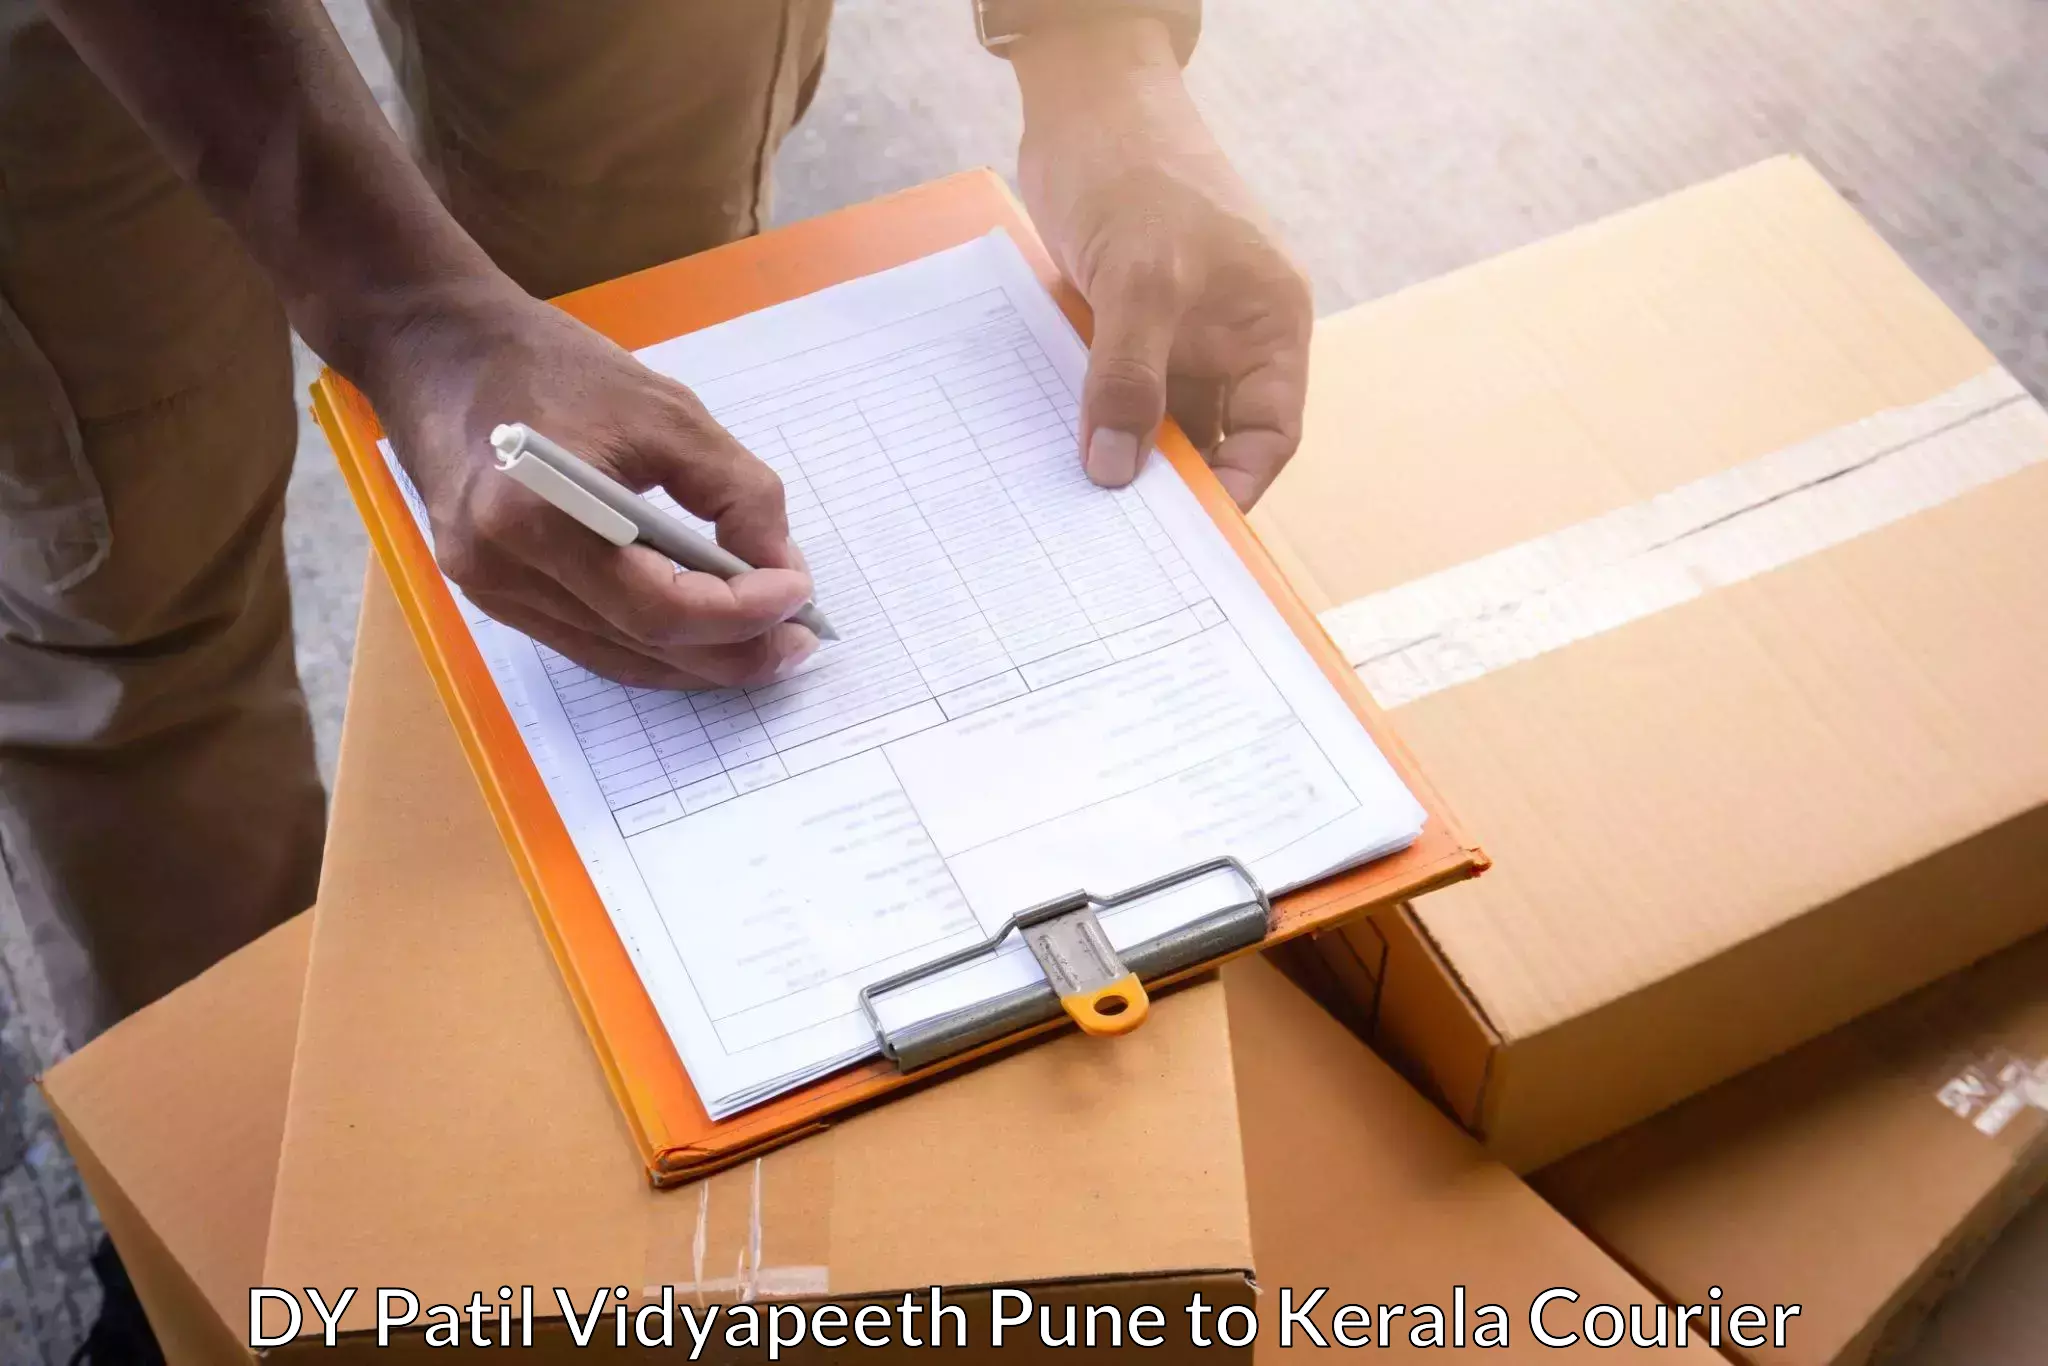 Remote area delivery DY Patil Vidyapeeth Pune to Alappuzha